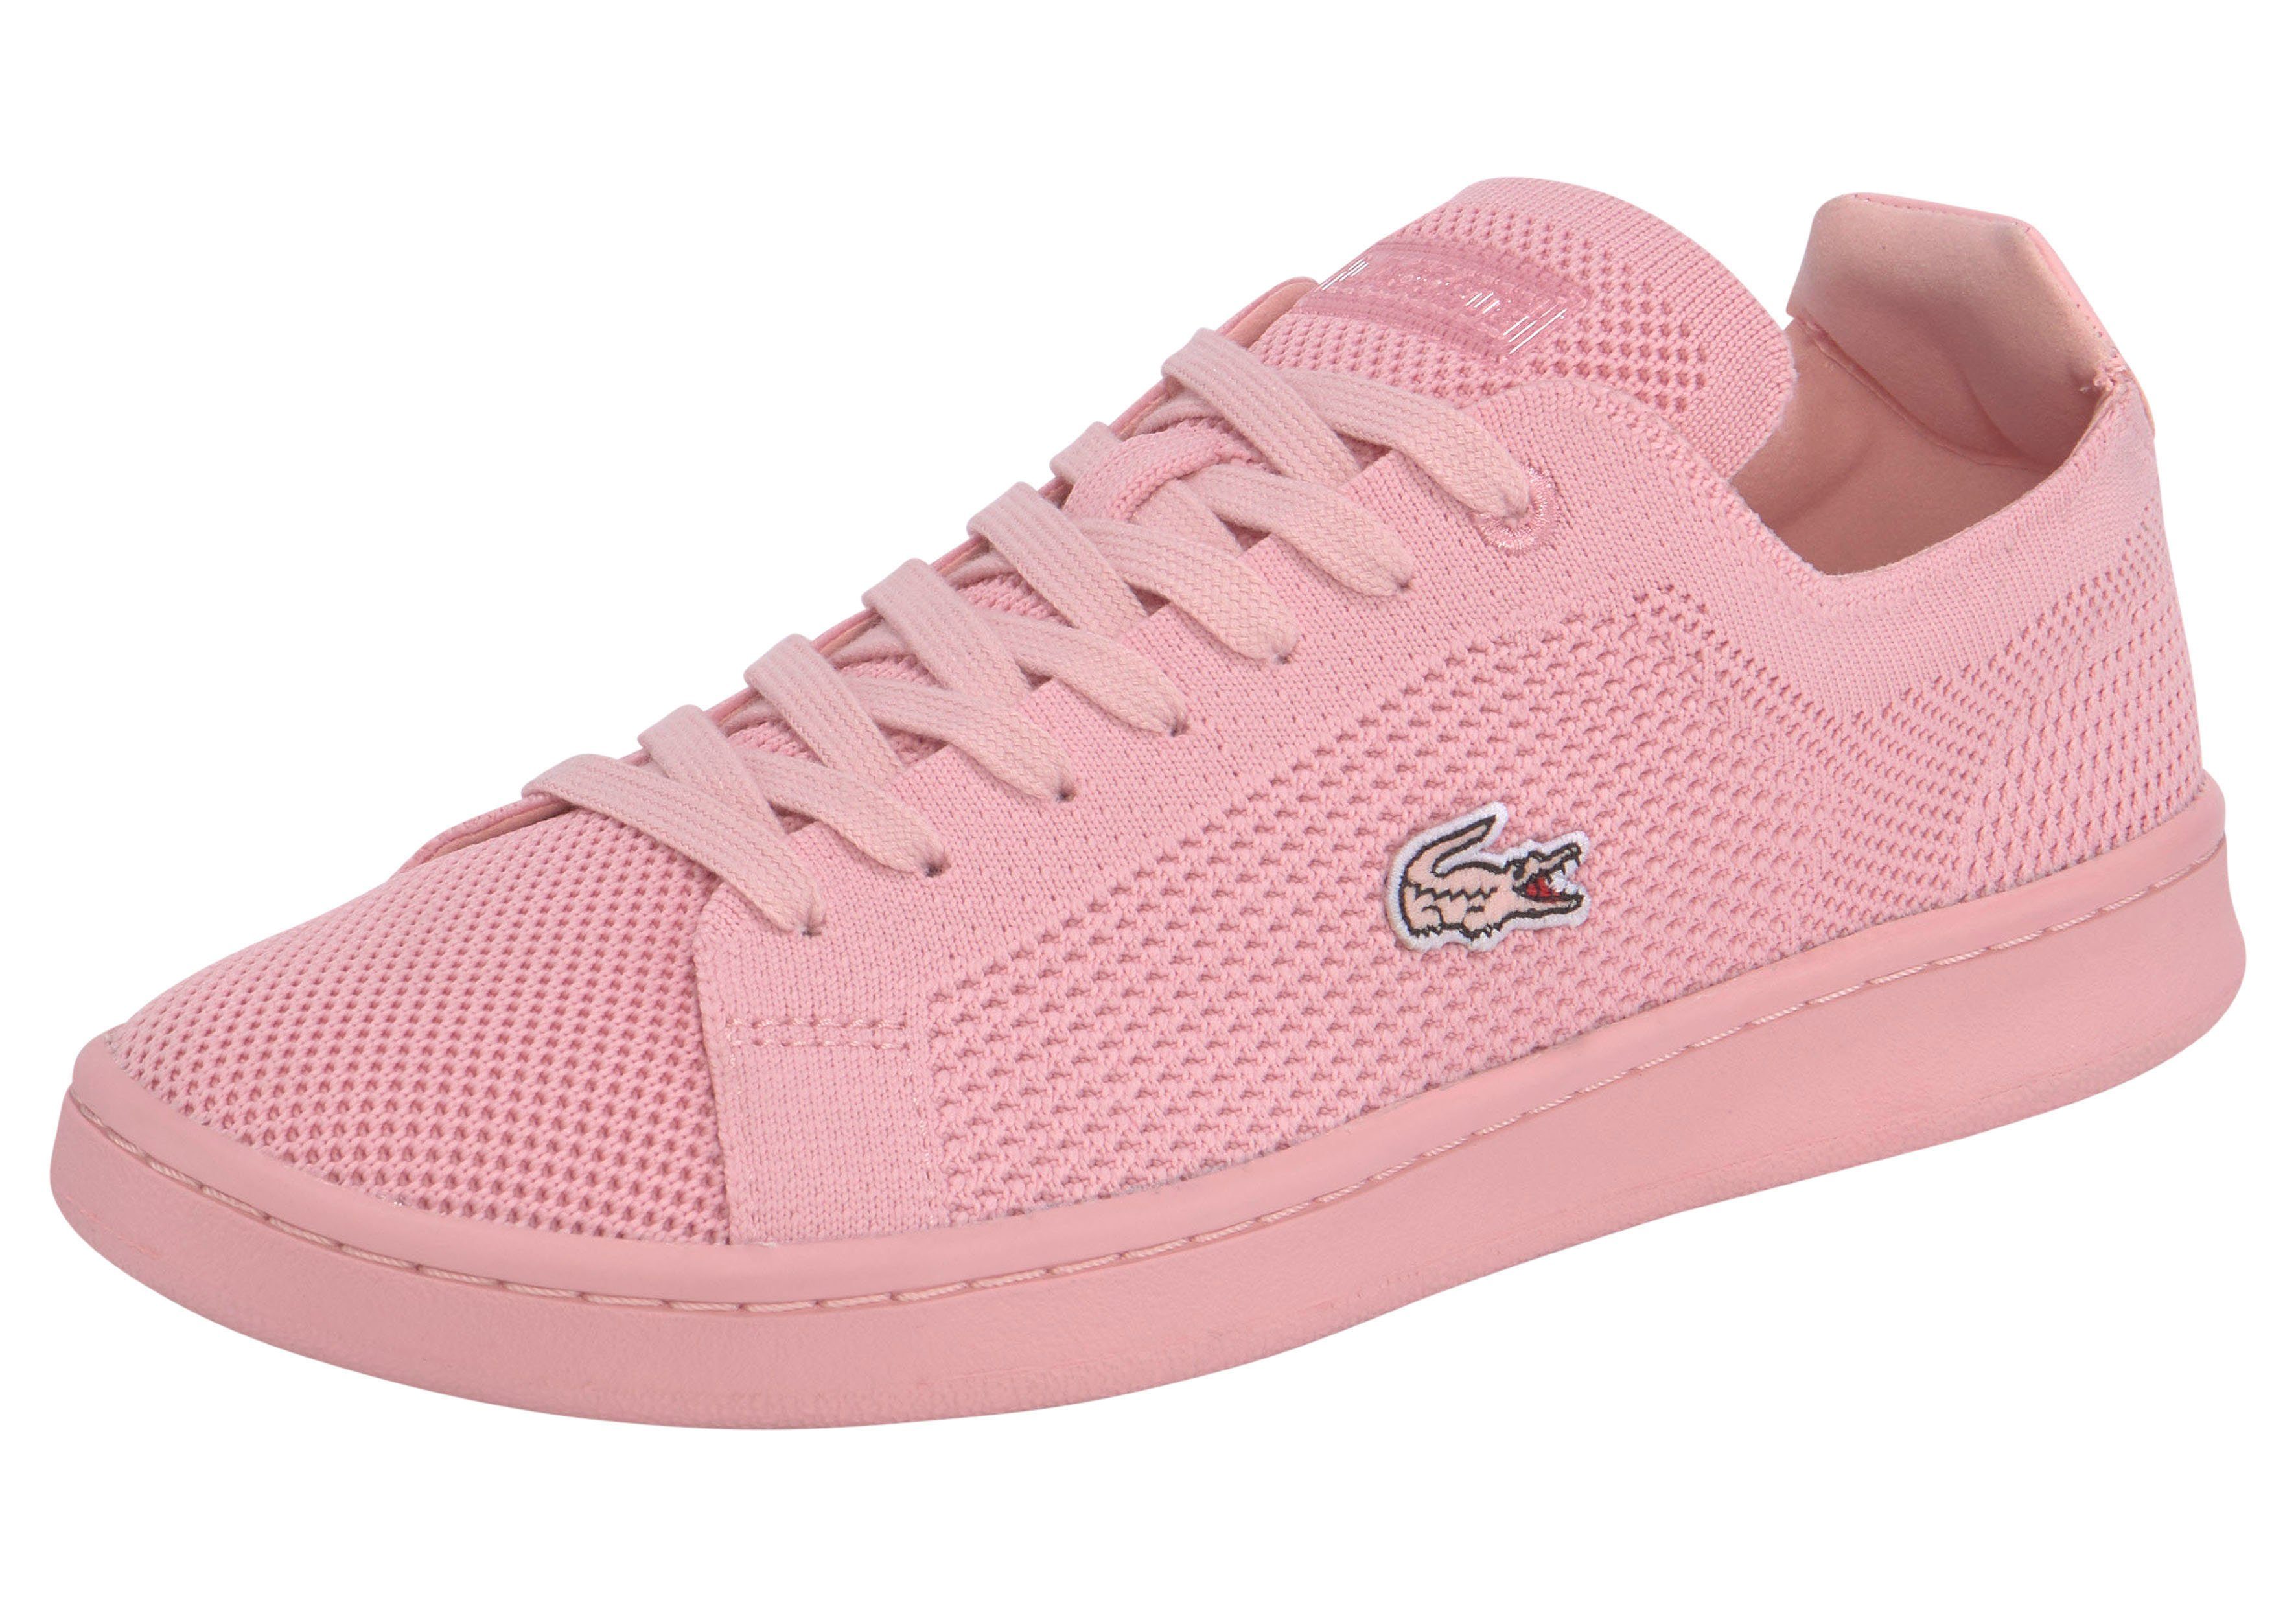 Lacoste CARNABY PIQUEE 123 SFA Sneaker 1 pink